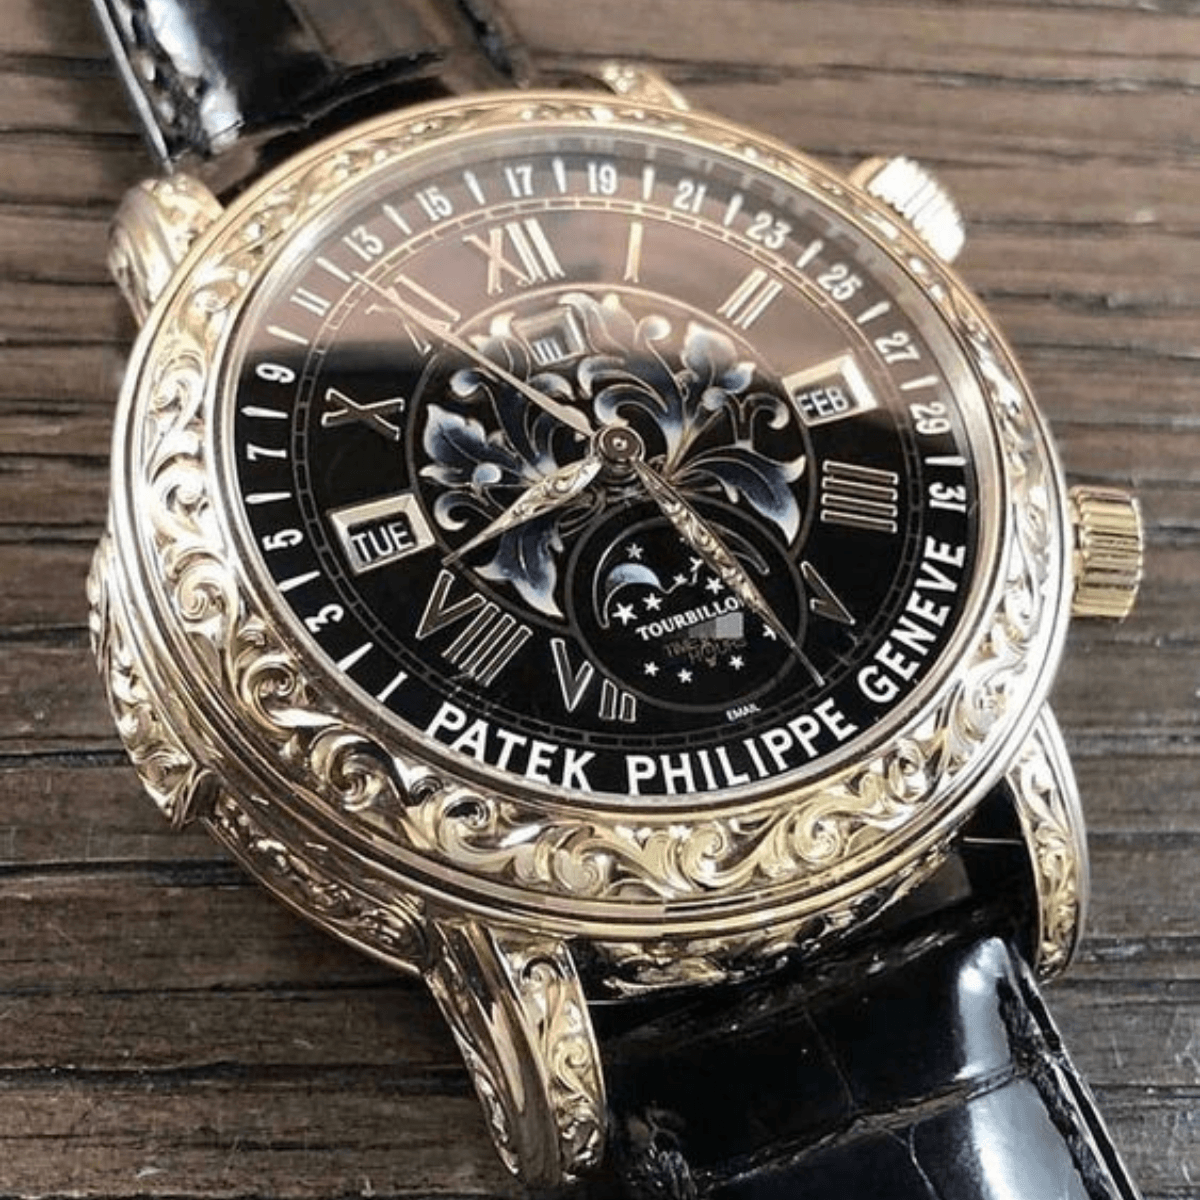 Authentication Guide: How to Tell a Real vs Fake Patek Philippe